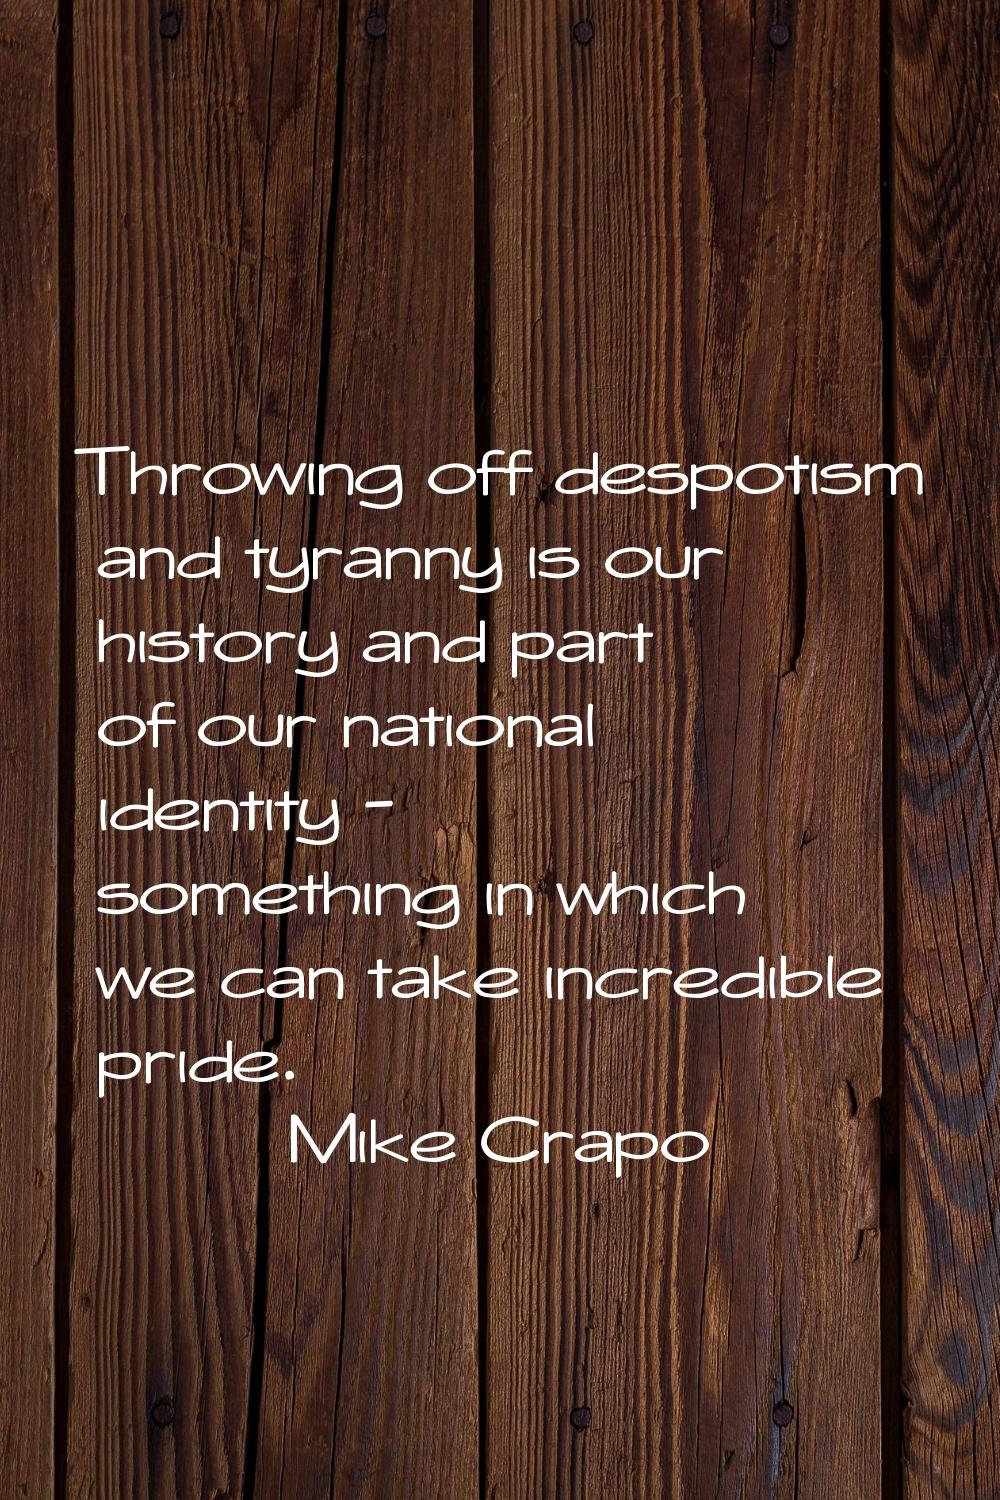 Throwing off despotism and tyranny is our history and part of our national identity - something in 